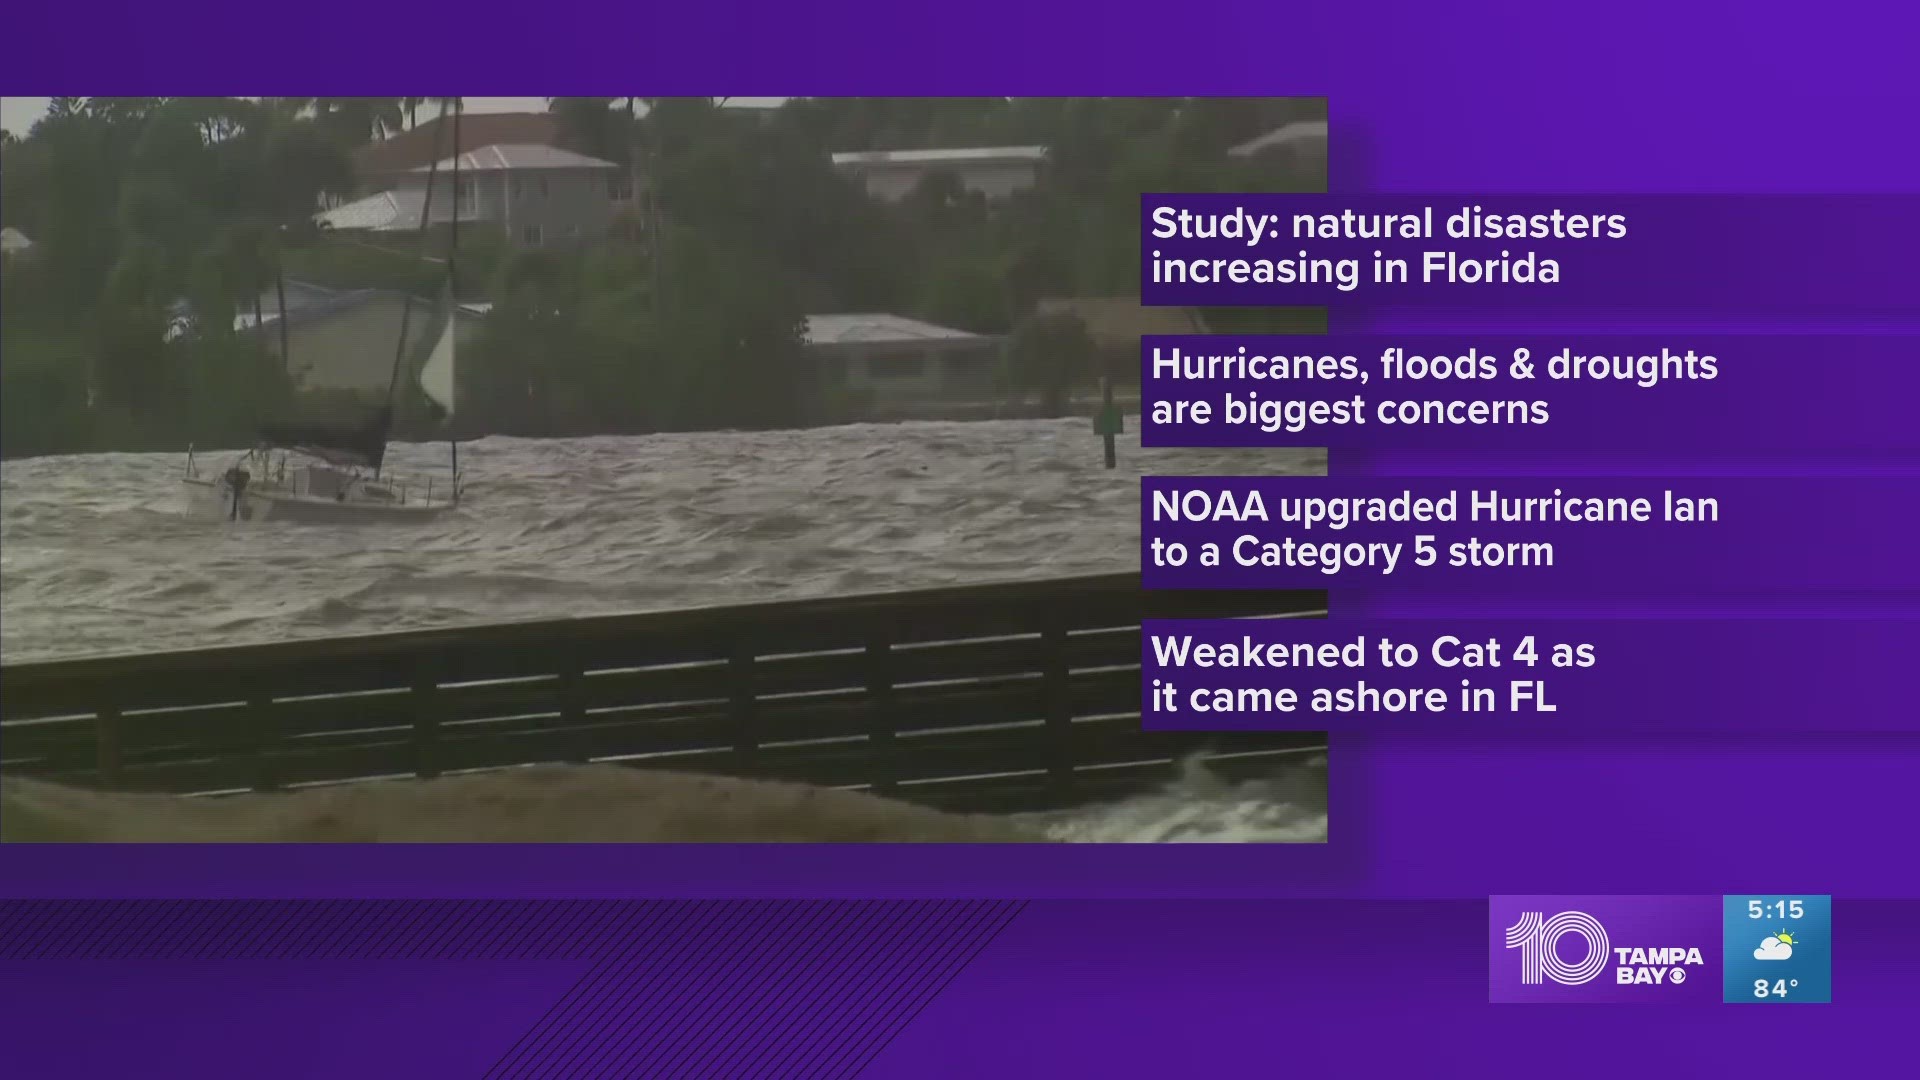 The report also says Ian was the costliest hurricane in Florida history.